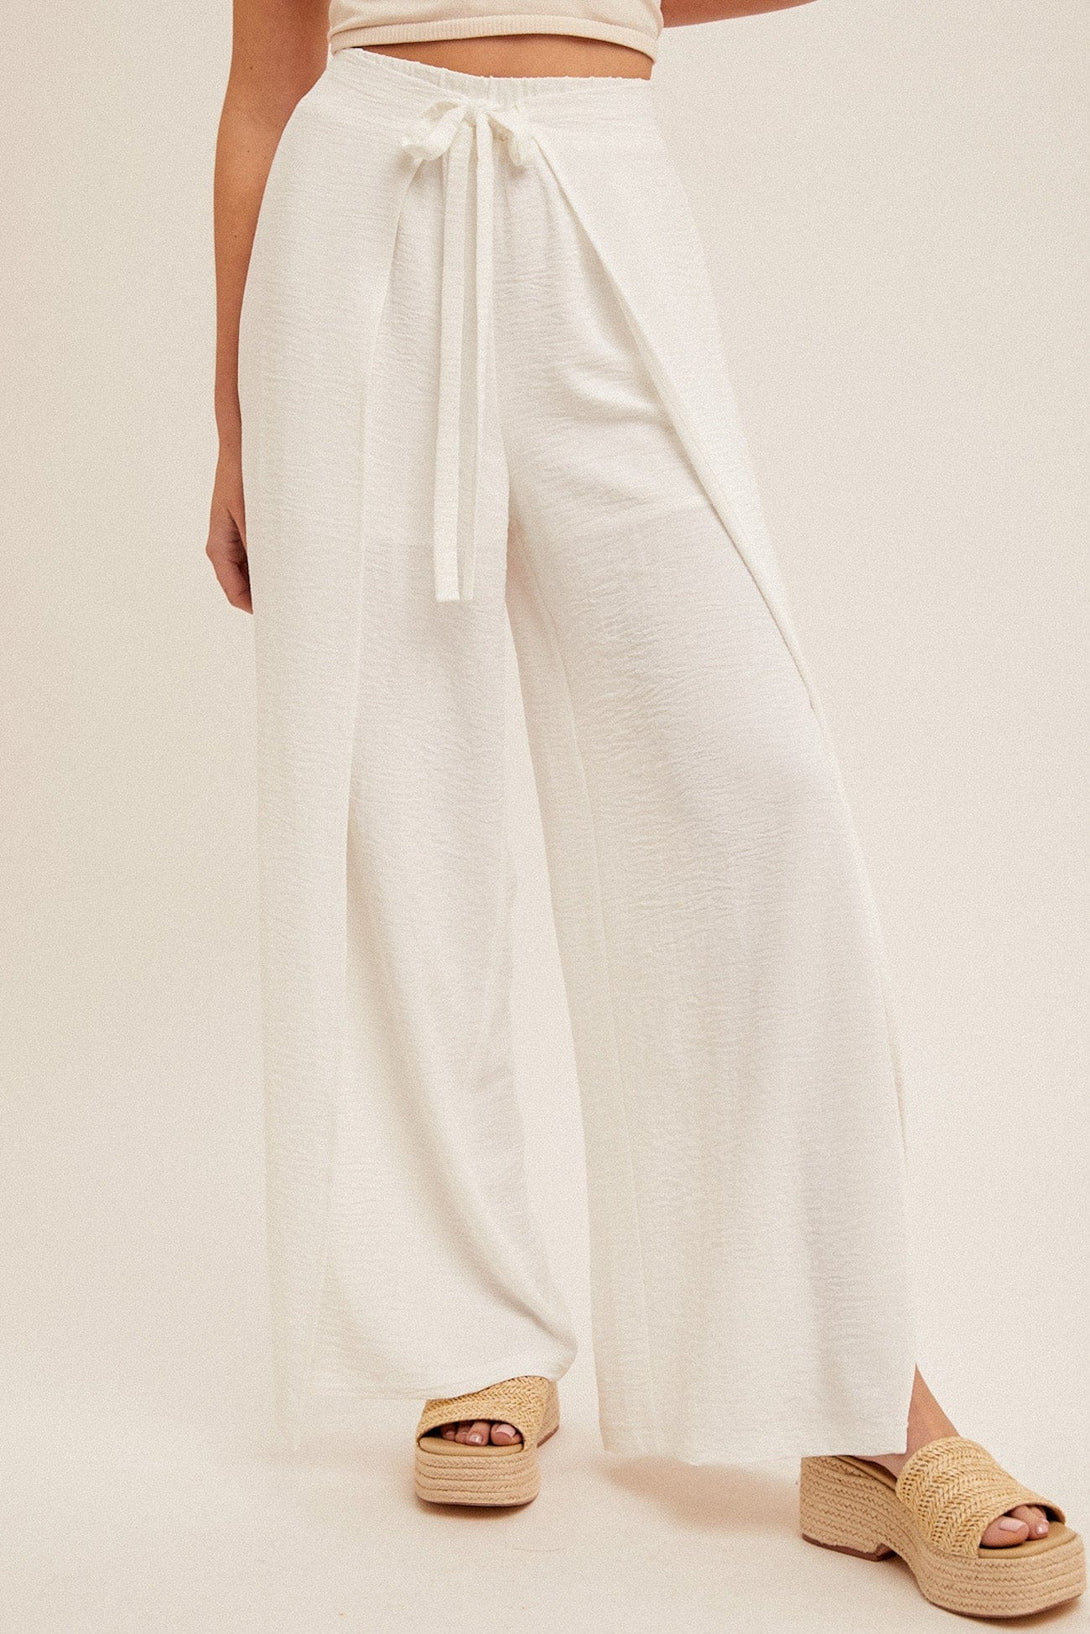 Hem & Thread Overlapping Wrap Front Self-Tie and Elastic Waist Wide Leg Pants